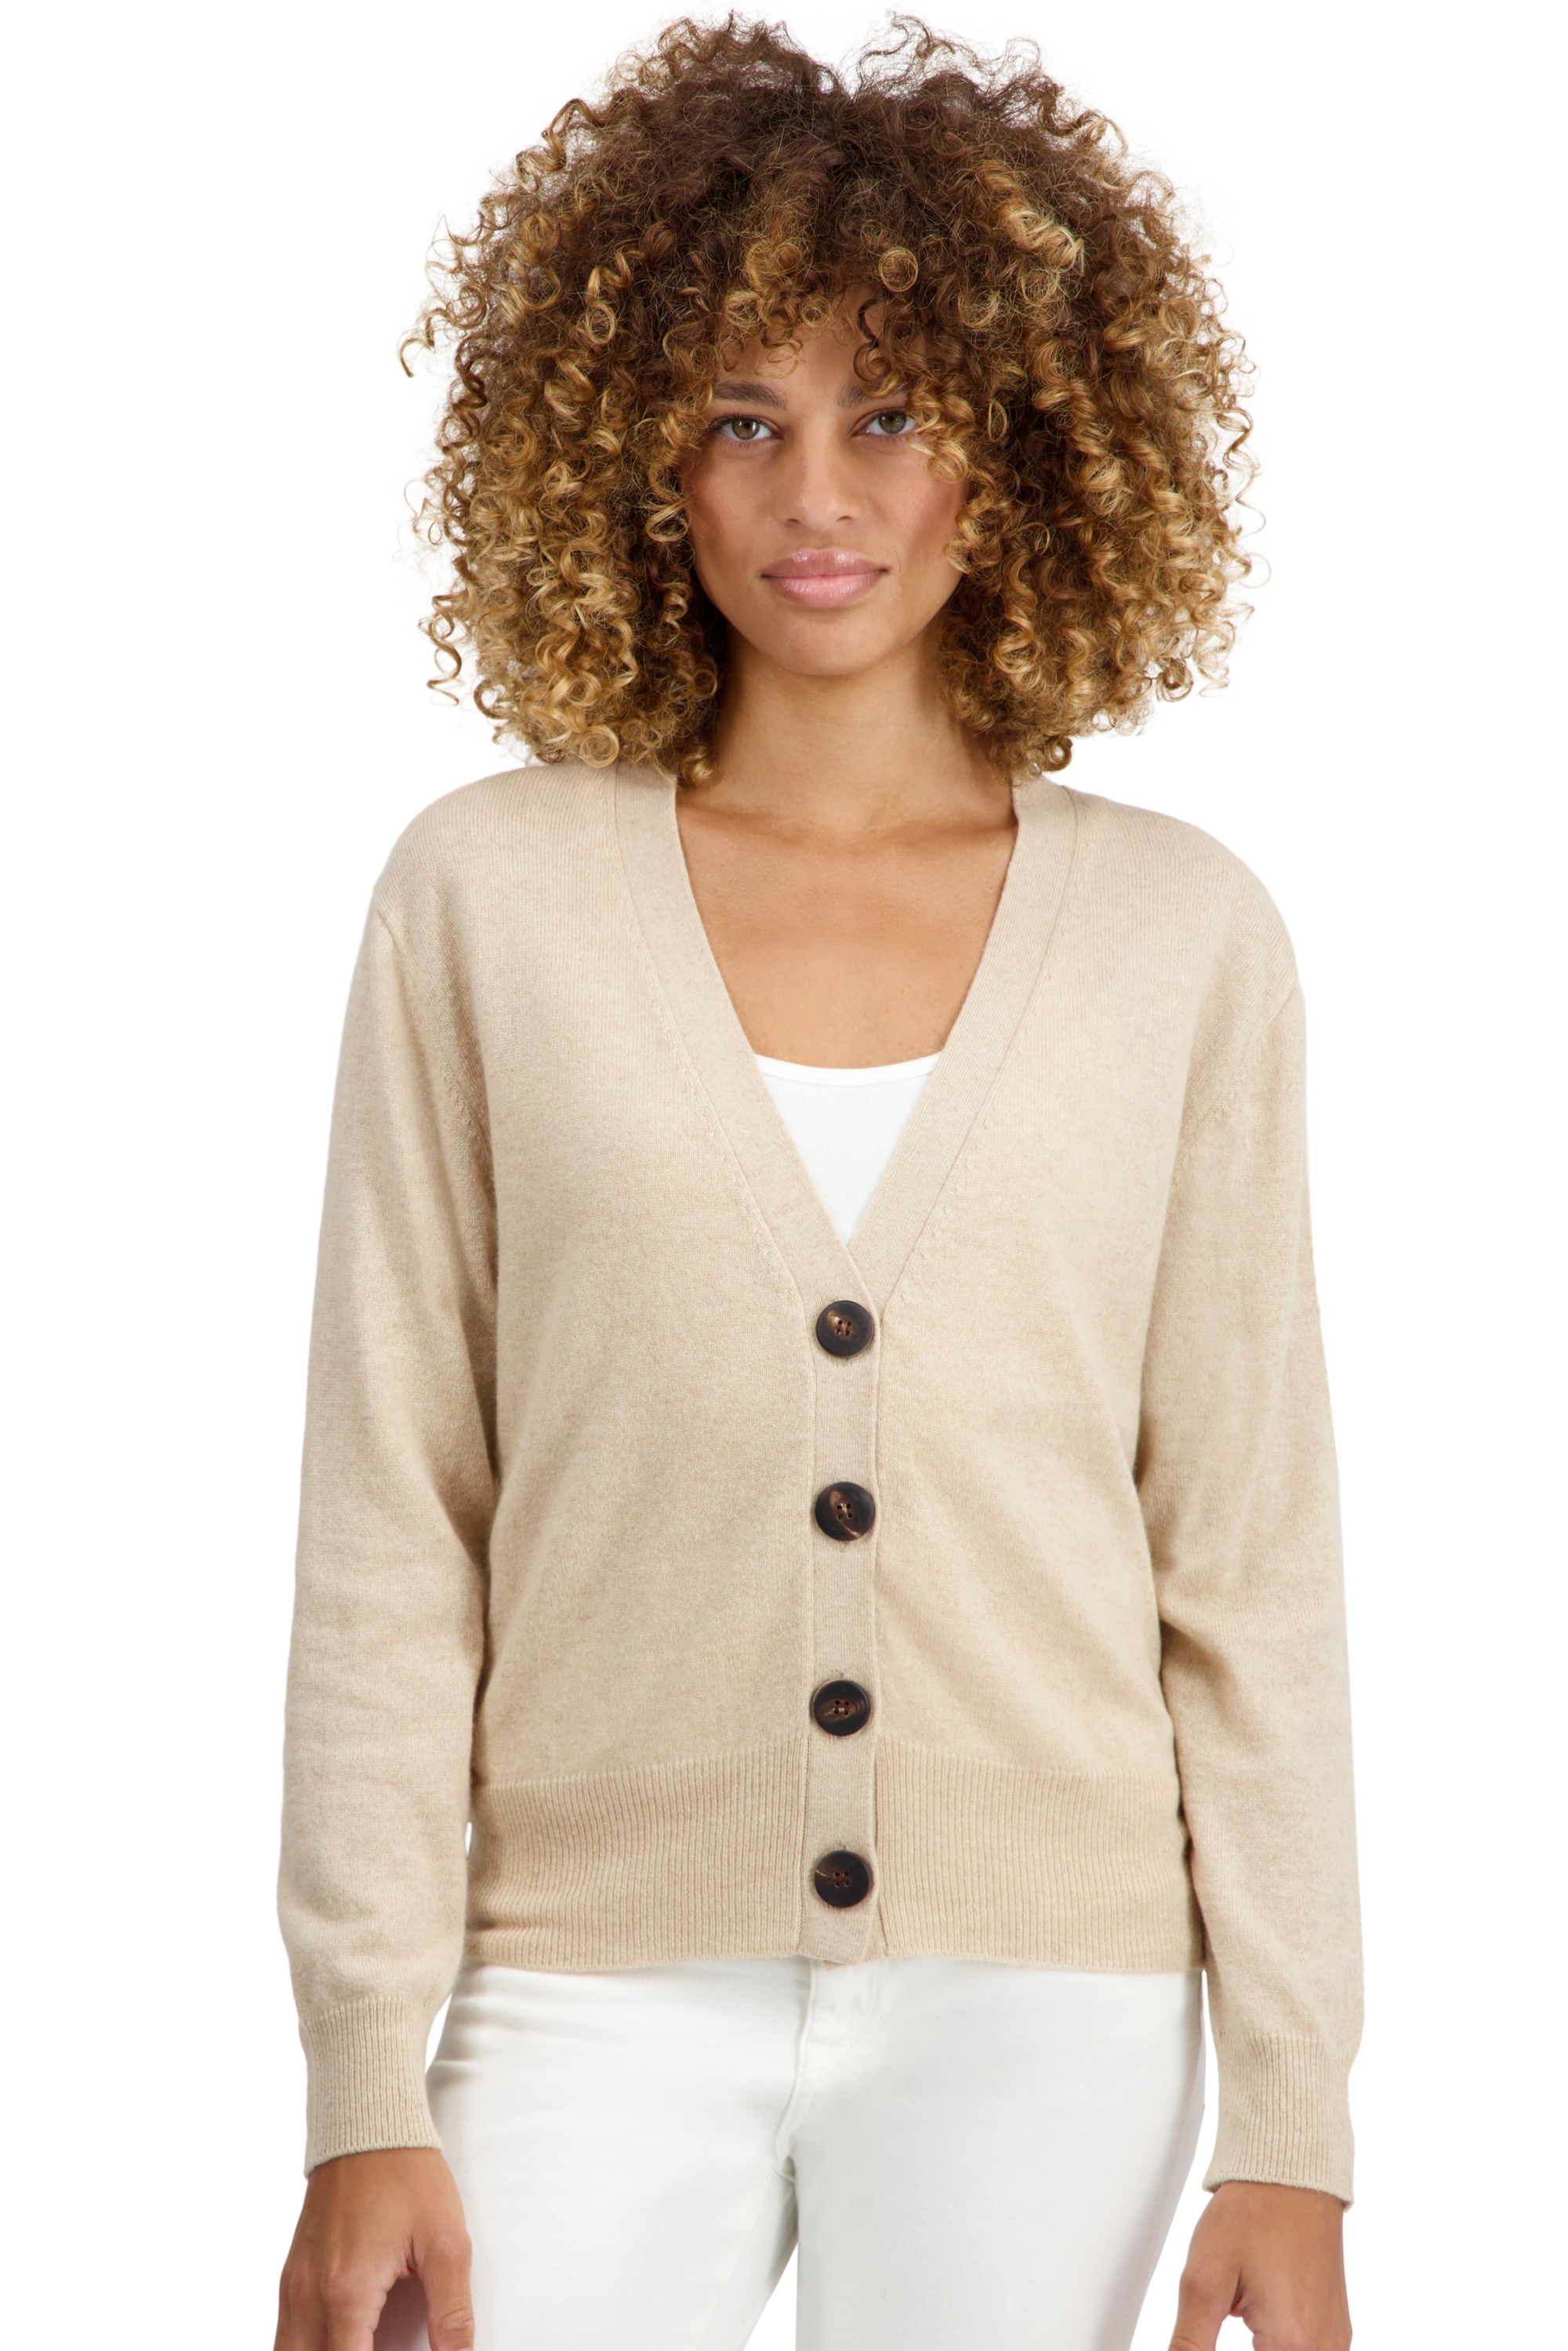 Cachemire pull femme talitha natural beige s